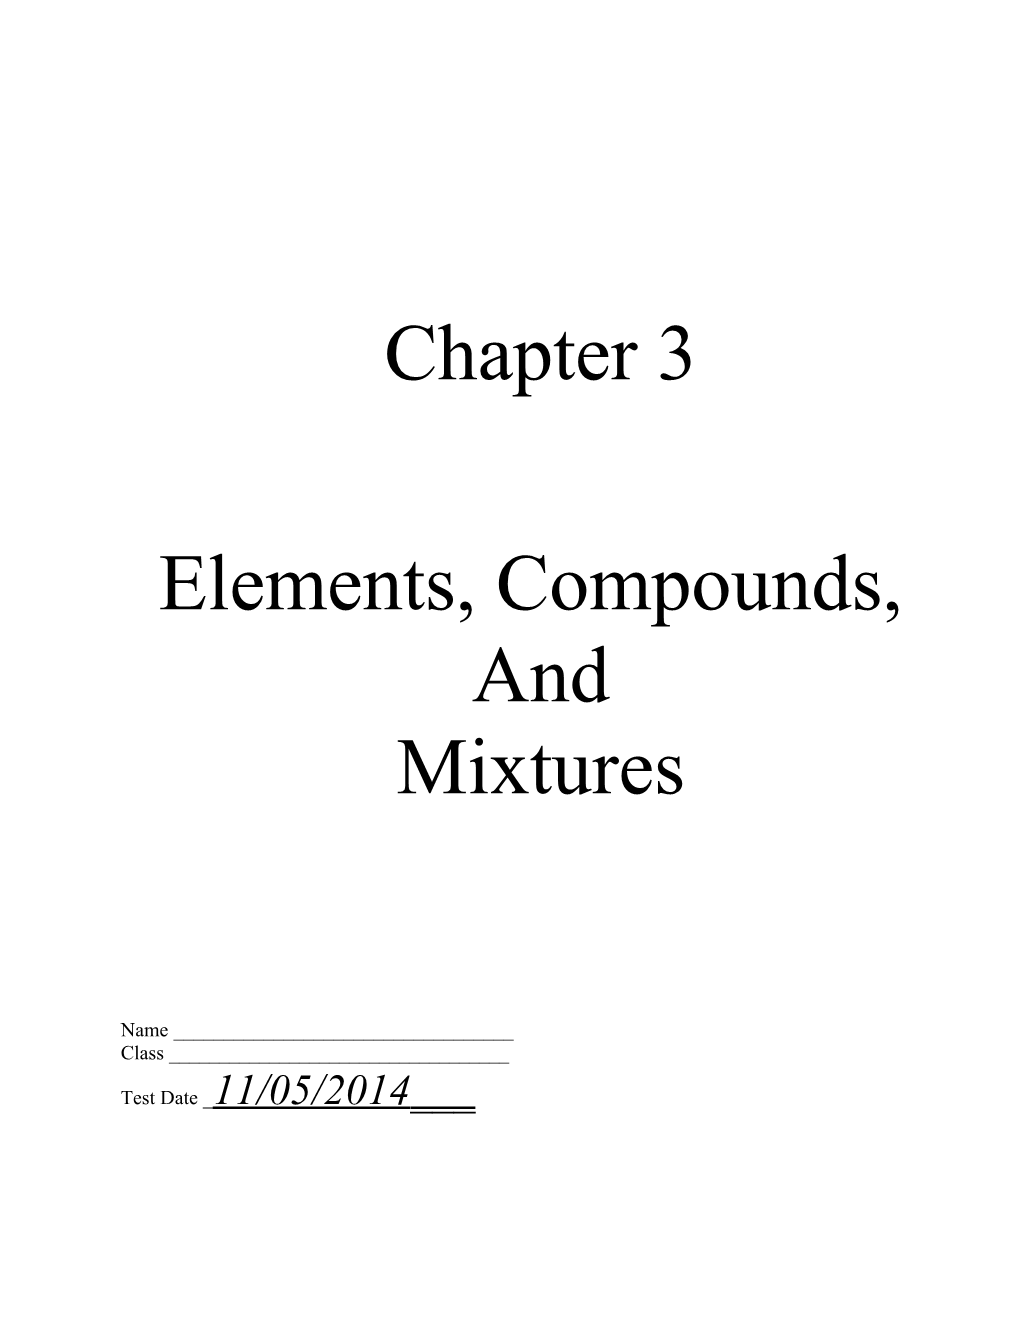 Chapter 3 Elements, Compounds, and Mixtures Outline